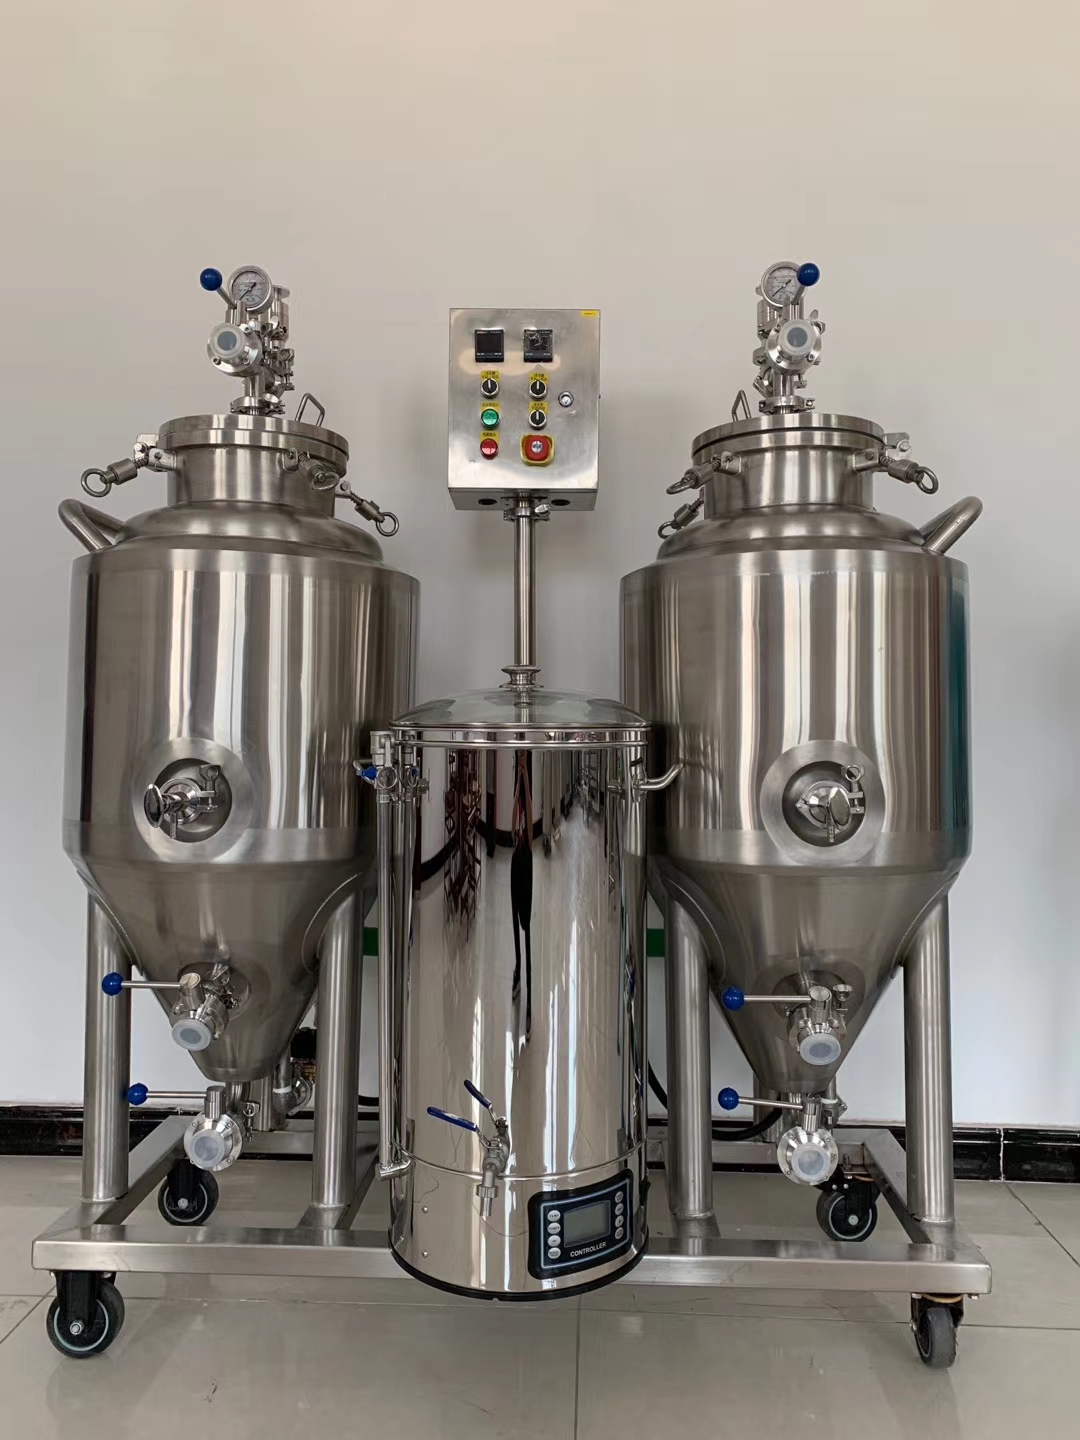 Belgium craft small size beer brewing equipment of Stainless steel from China factory 2020 W1